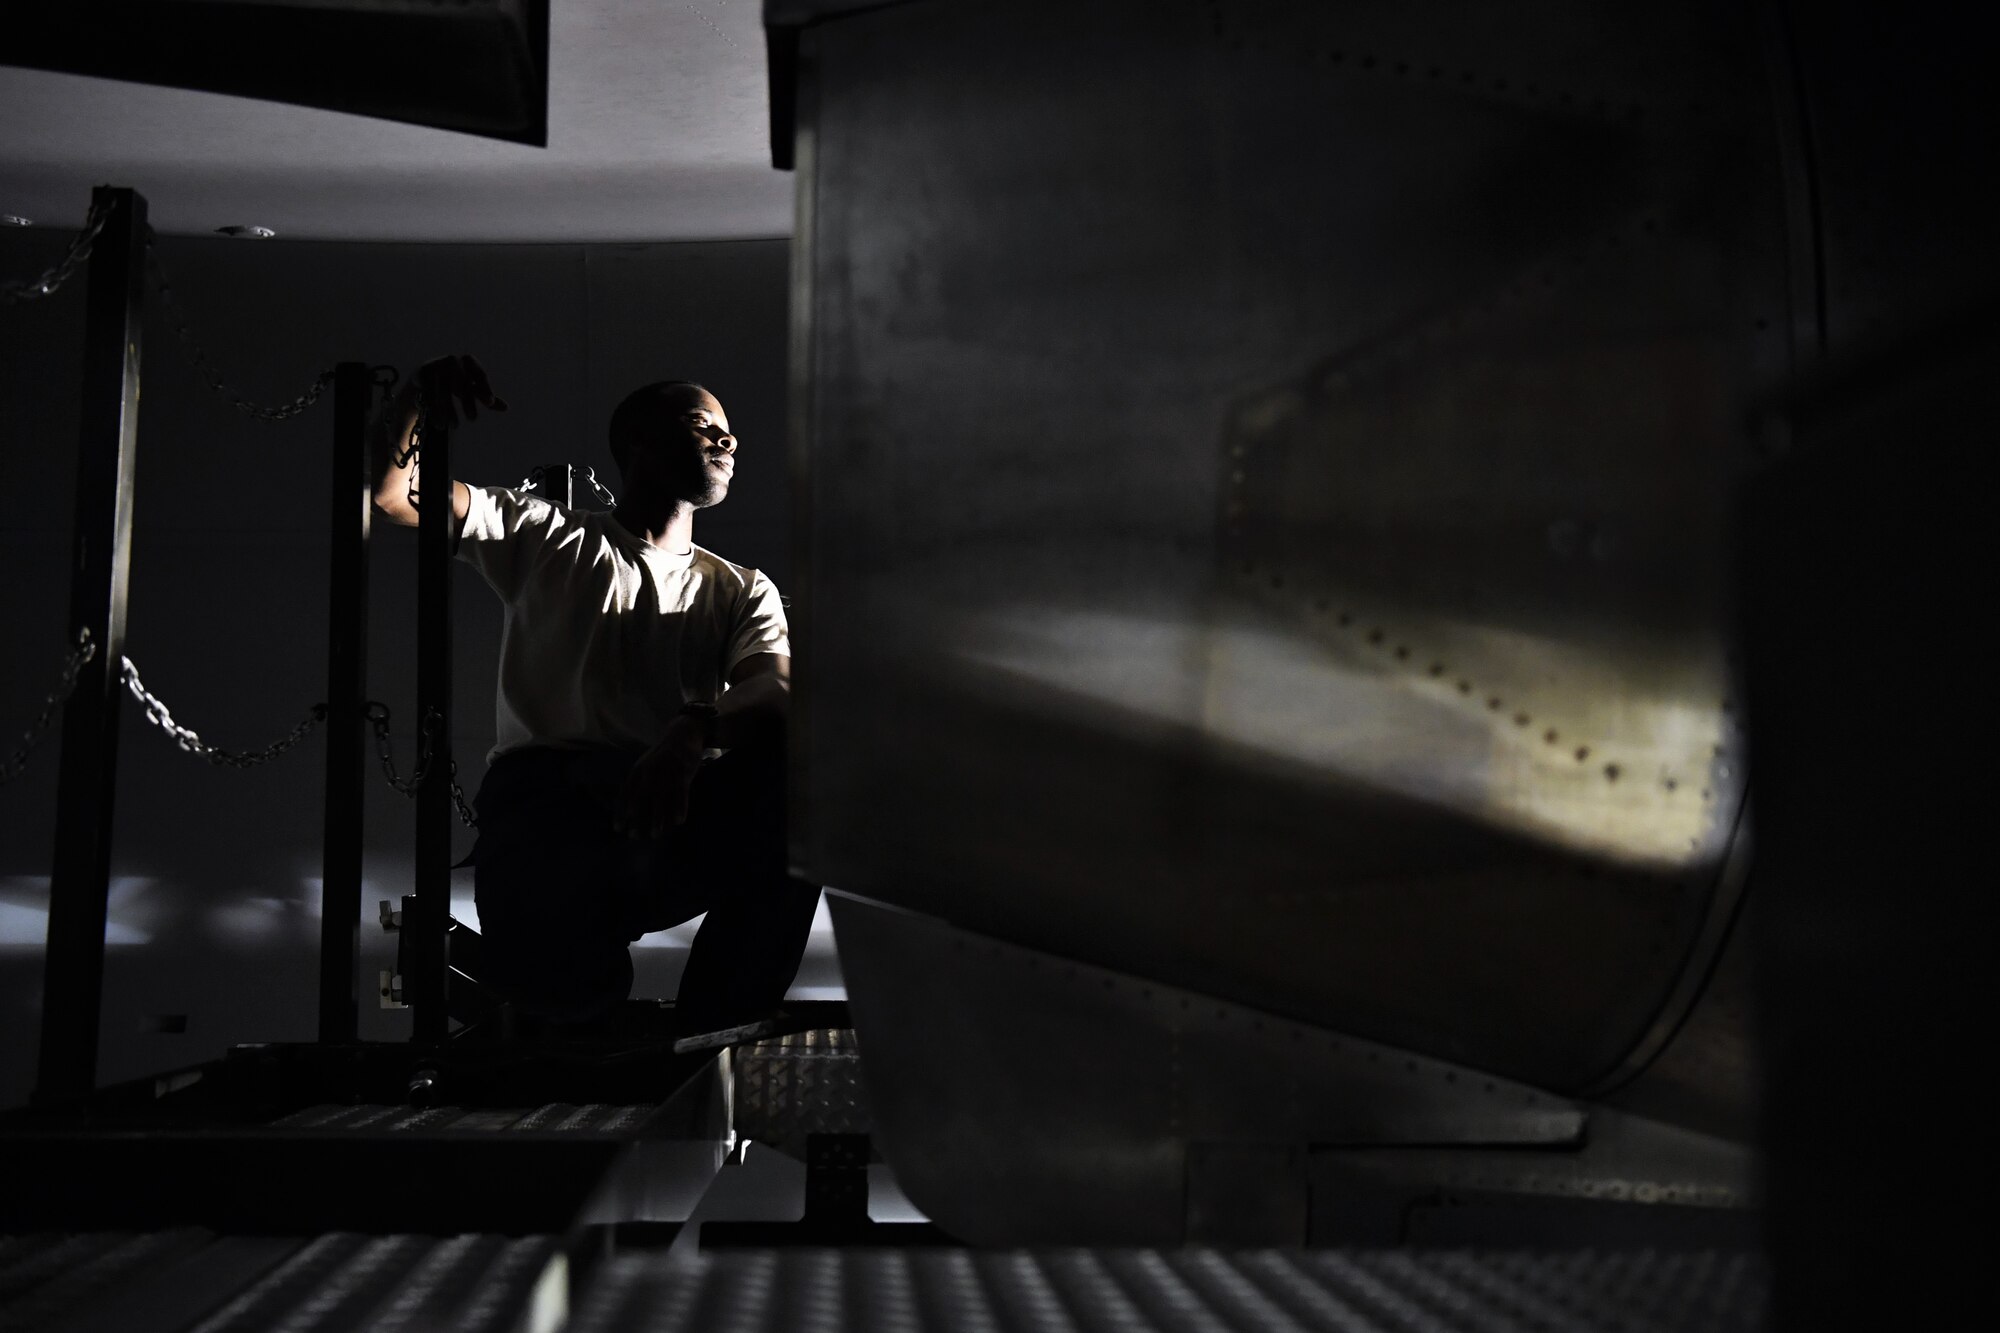 Staff Sgt. Reuben Bowers, 721st Air Mobility Operations Group airlift specialist mission maintenance craftsman, inspects an engine on a C-17 Globemaster III aircraft July 19, 2018, at an undisclosed location in Southwest Asia. Bowers and his fellow Airmen assisted in the transport and installation of the engine from Ramstein Air Base, Germany. (U.S. Air Force photo by Staff Sgt. Christopher Stoltz)